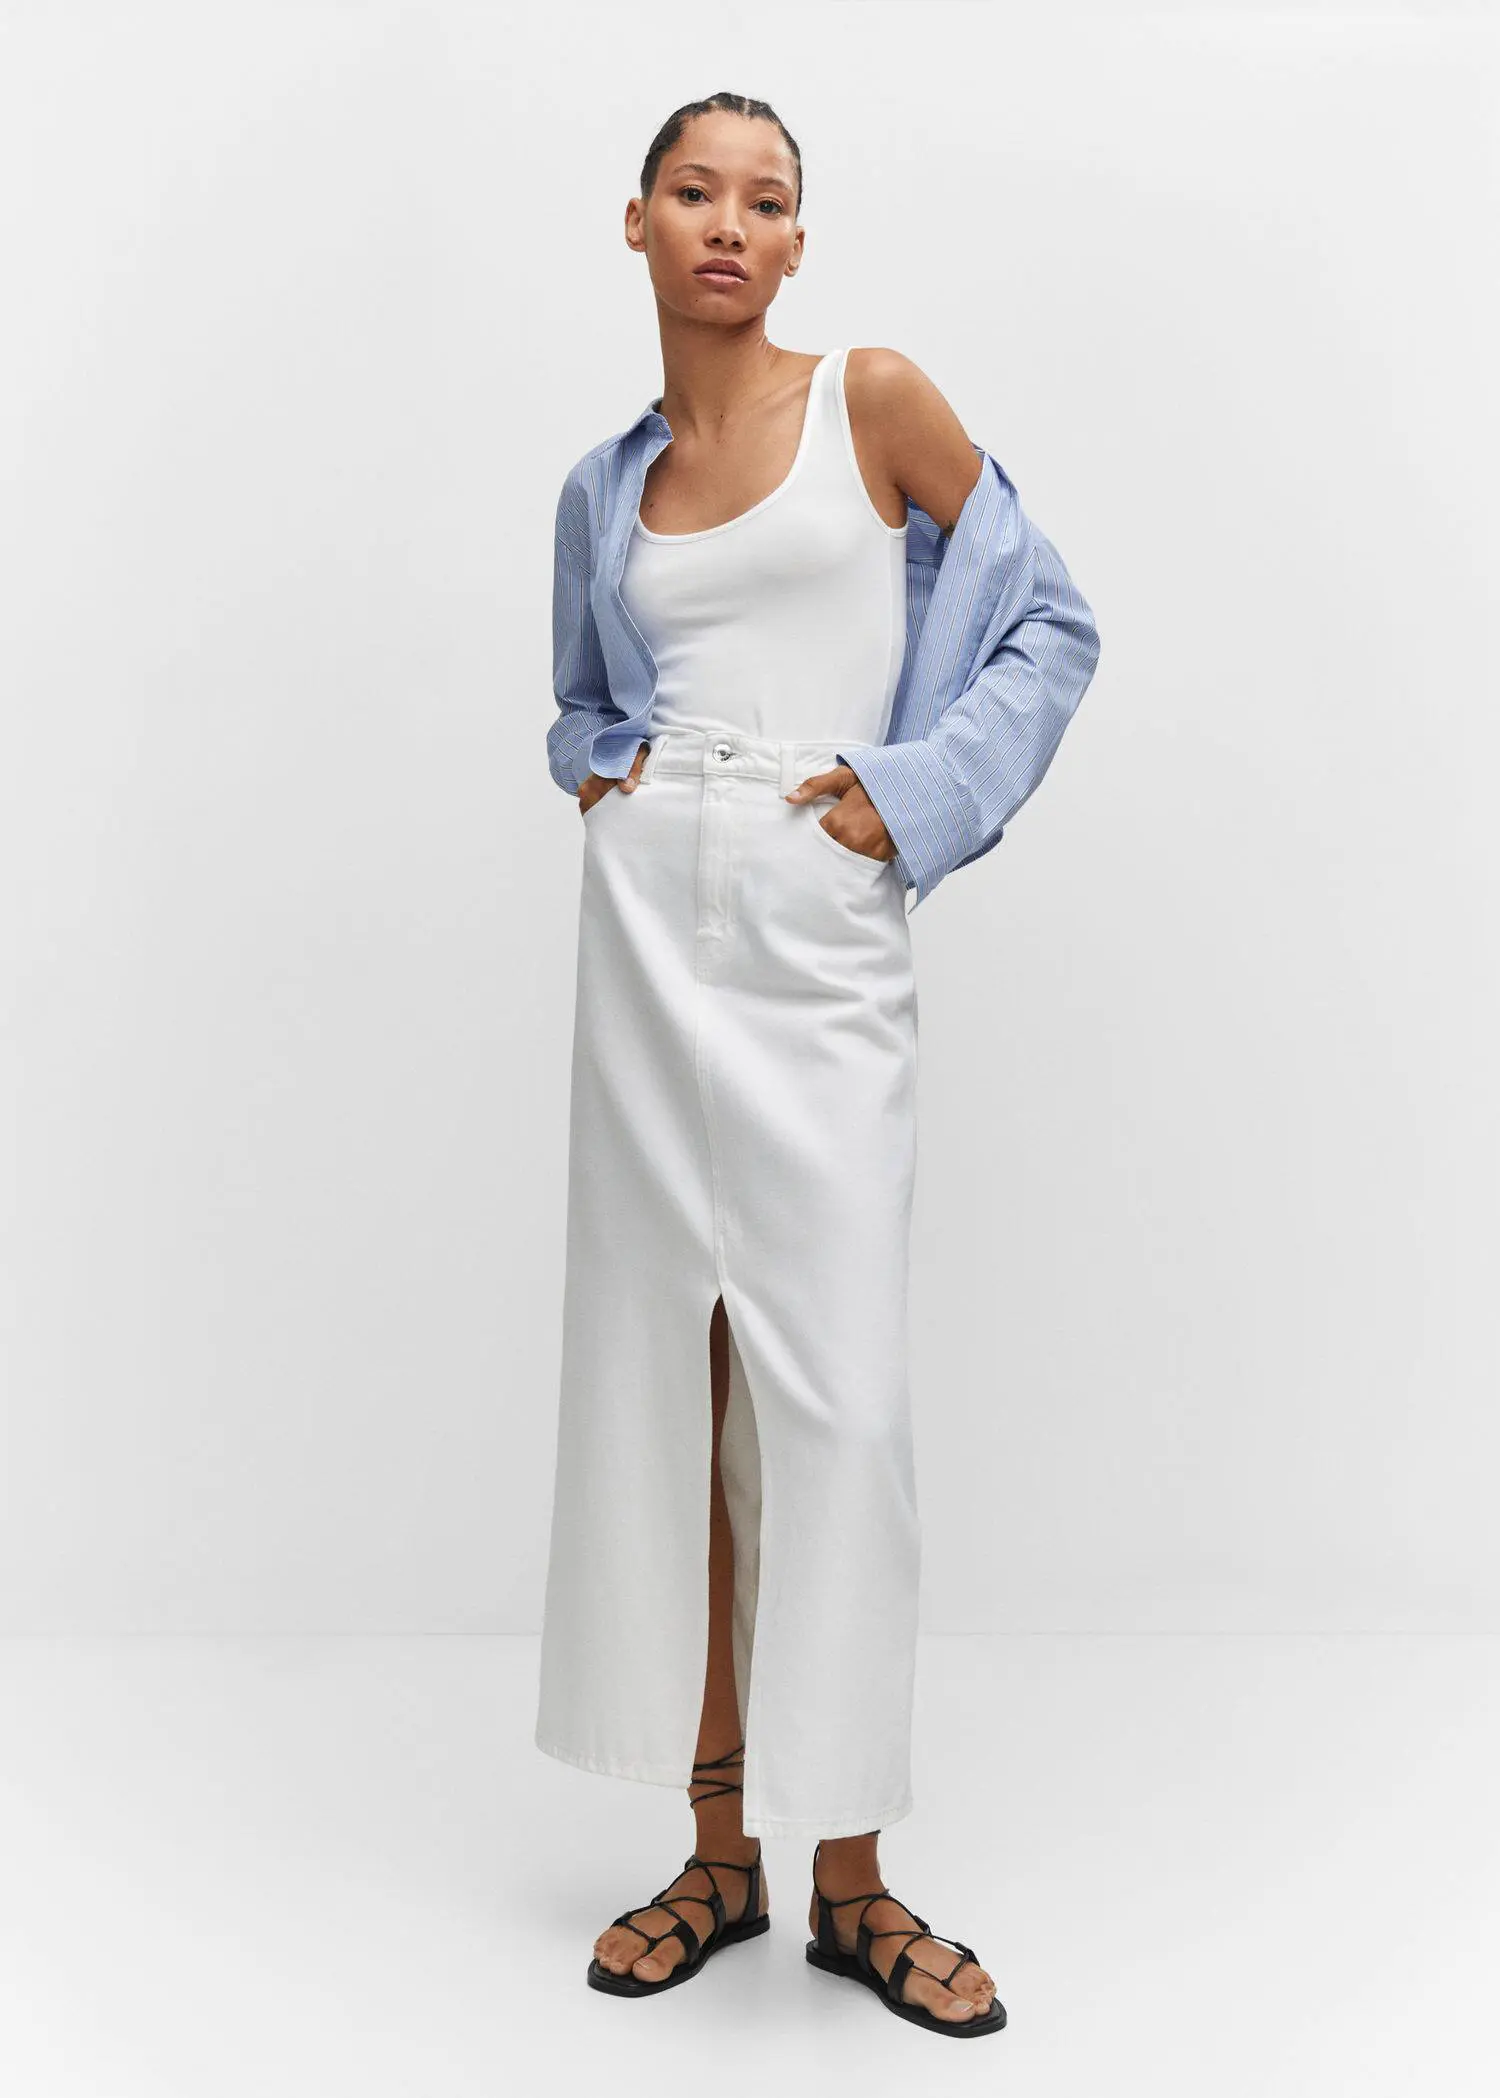 Mango Strapless halter neck top. a woman wearing a white dress and a blue jacket. 